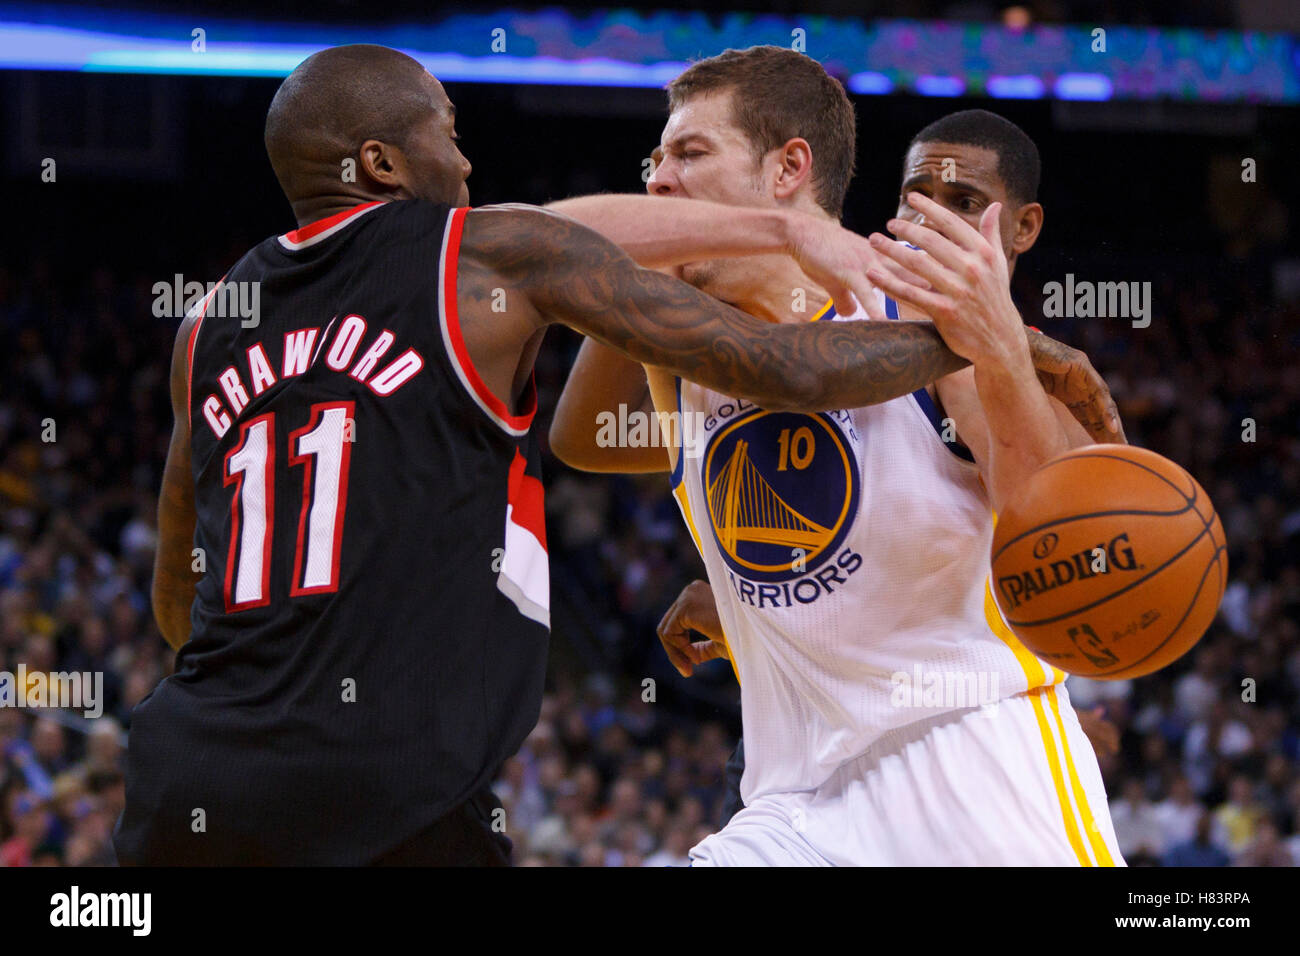 Feb 15, 2012; Oakland, CA, USA; Golden State Warriors power forward David Lee (10) is fouled by Portland Trail Blazers guard Jamal Crawford (11) during the fourth quarter at Oracle Arena. Portland defeated Golden State 93-91. Stock Photo